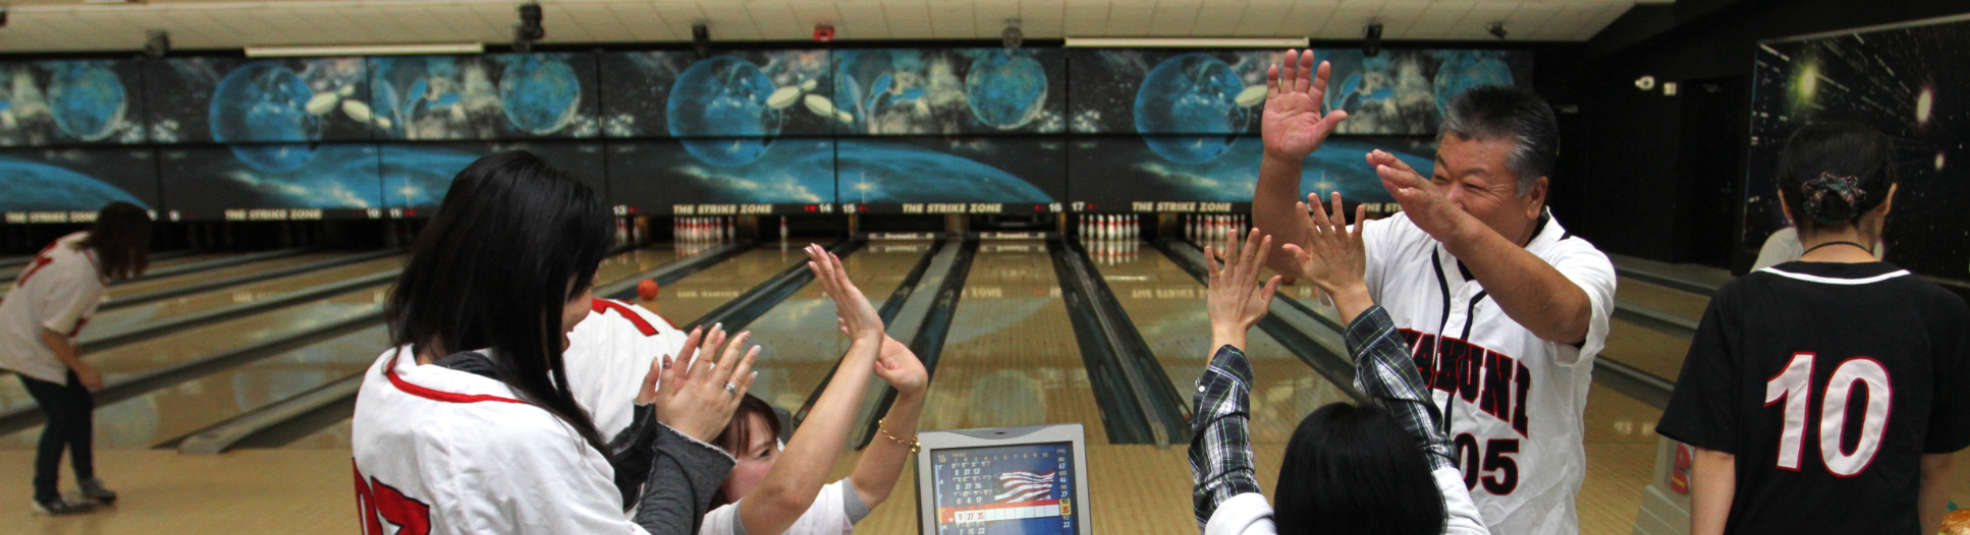 A family of 4 giving each other high 5 at Bowling center